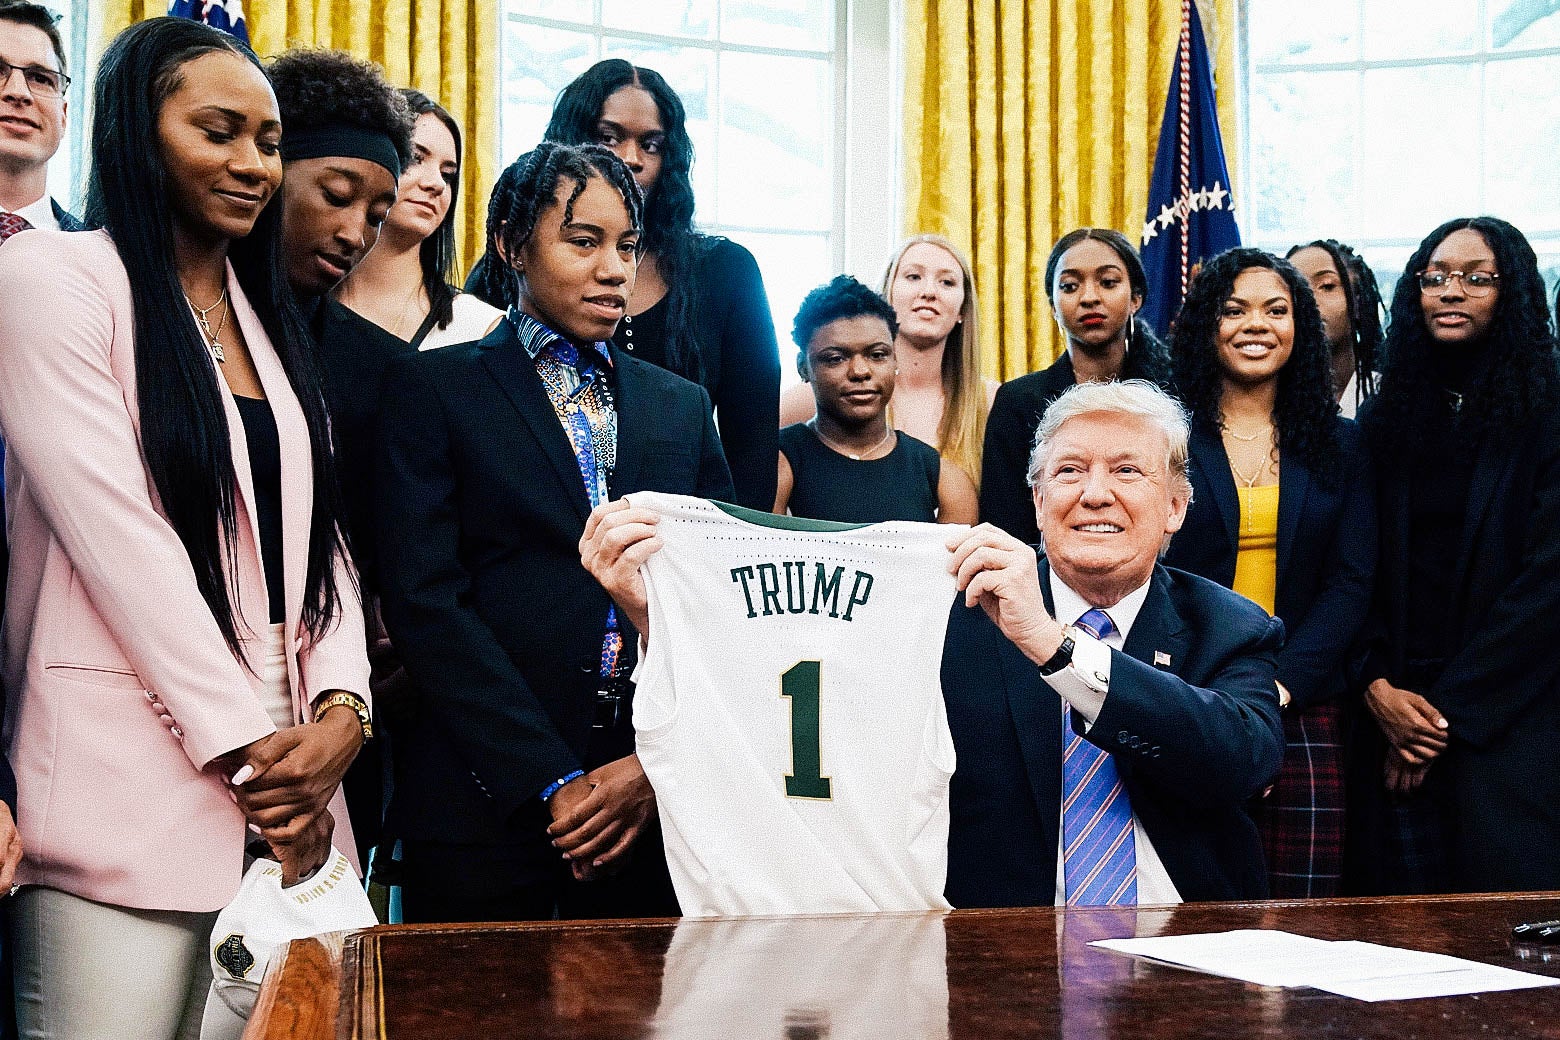 The Baylor women's basketball team stand around Trump in the Oval Office.